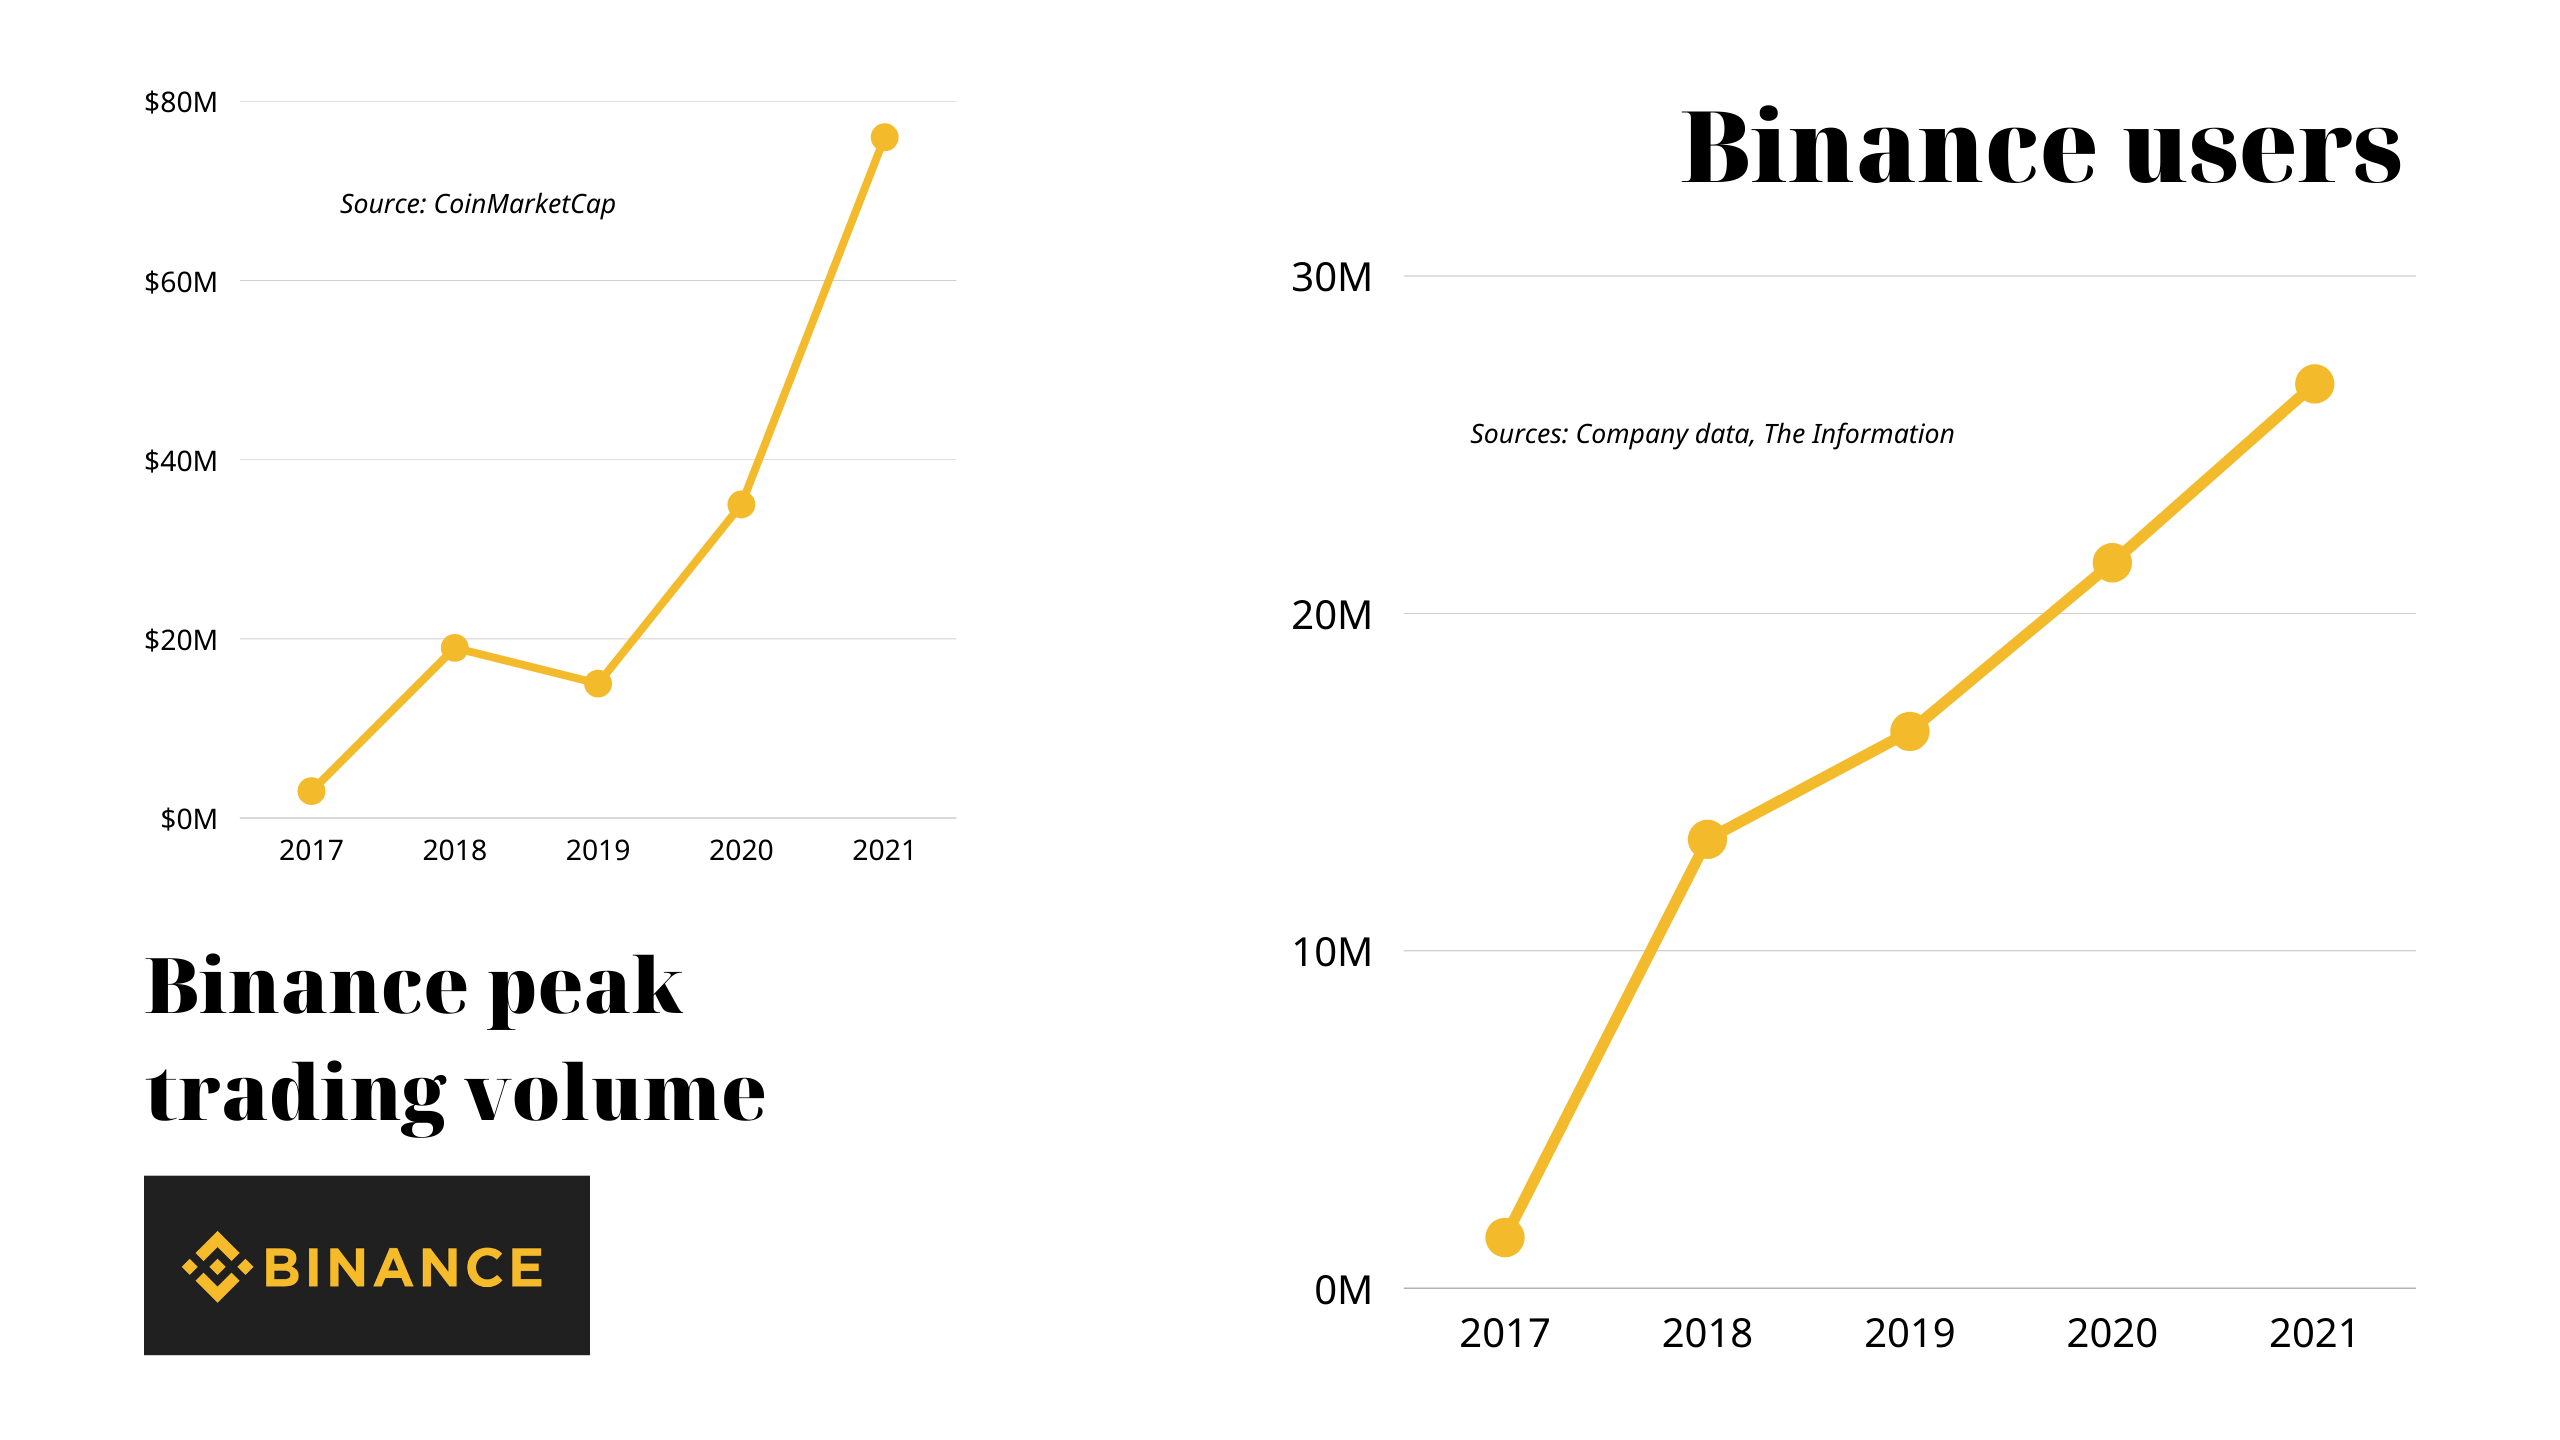 What is Binance's trading volume and users from 2017 to 2021